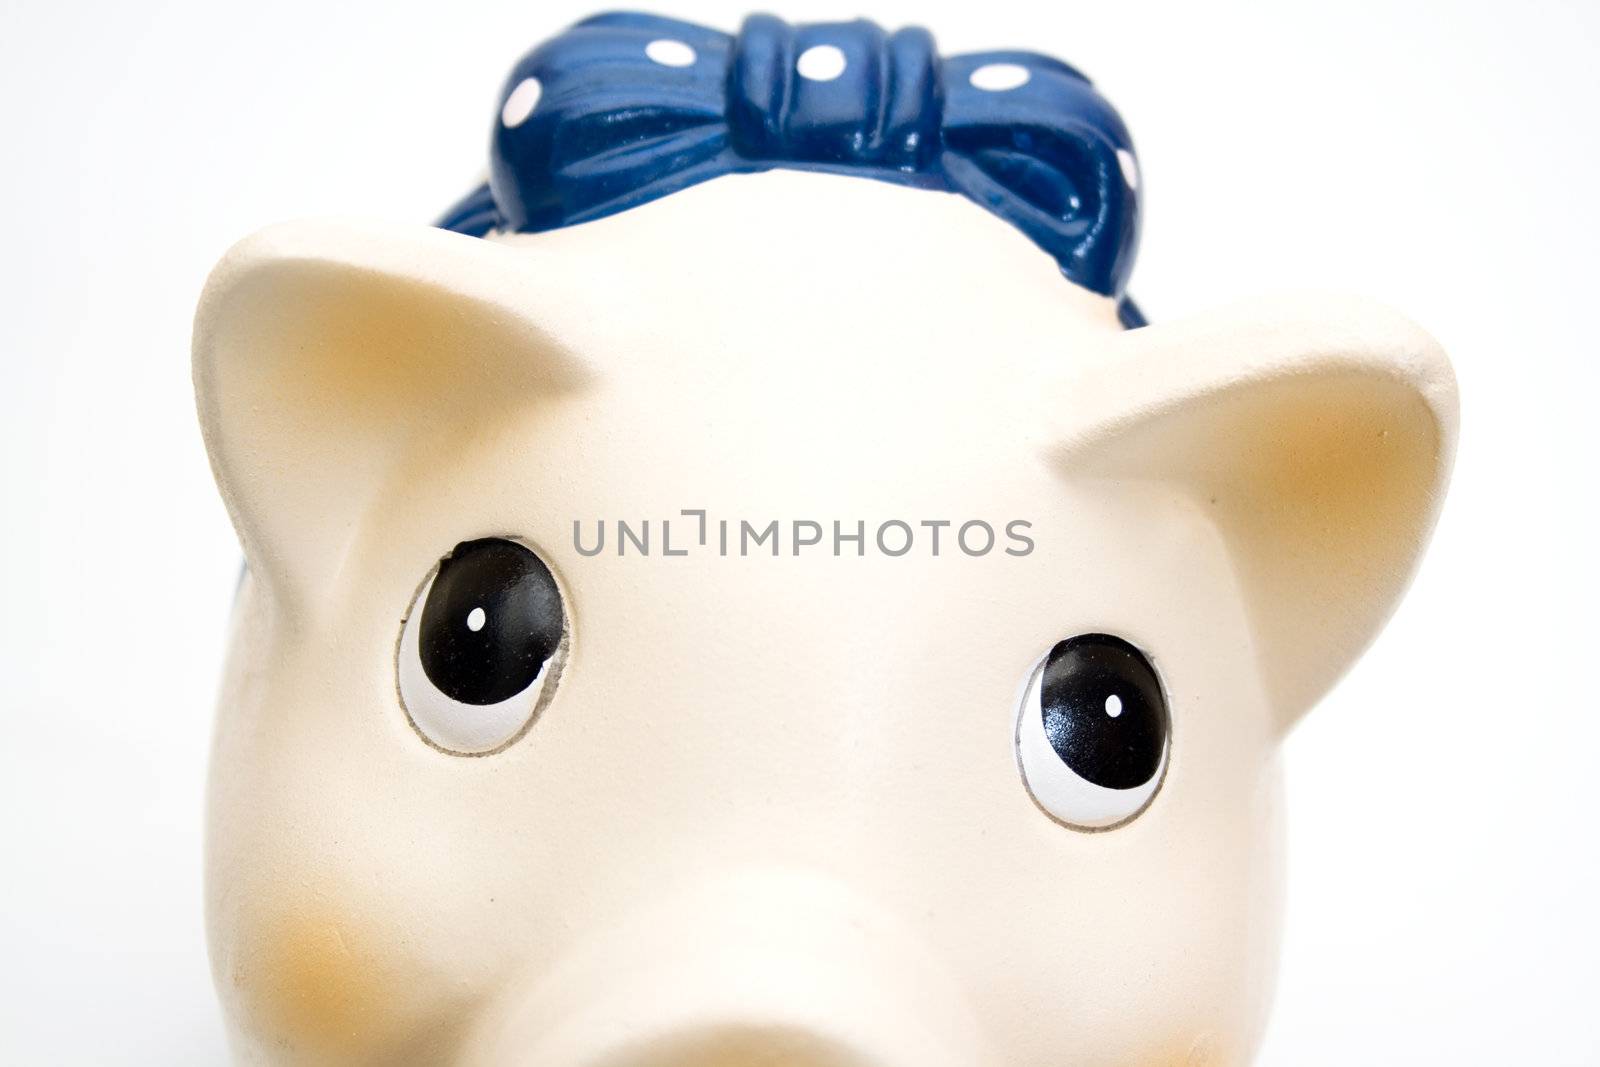 Cute piggy bank isolated on white background.